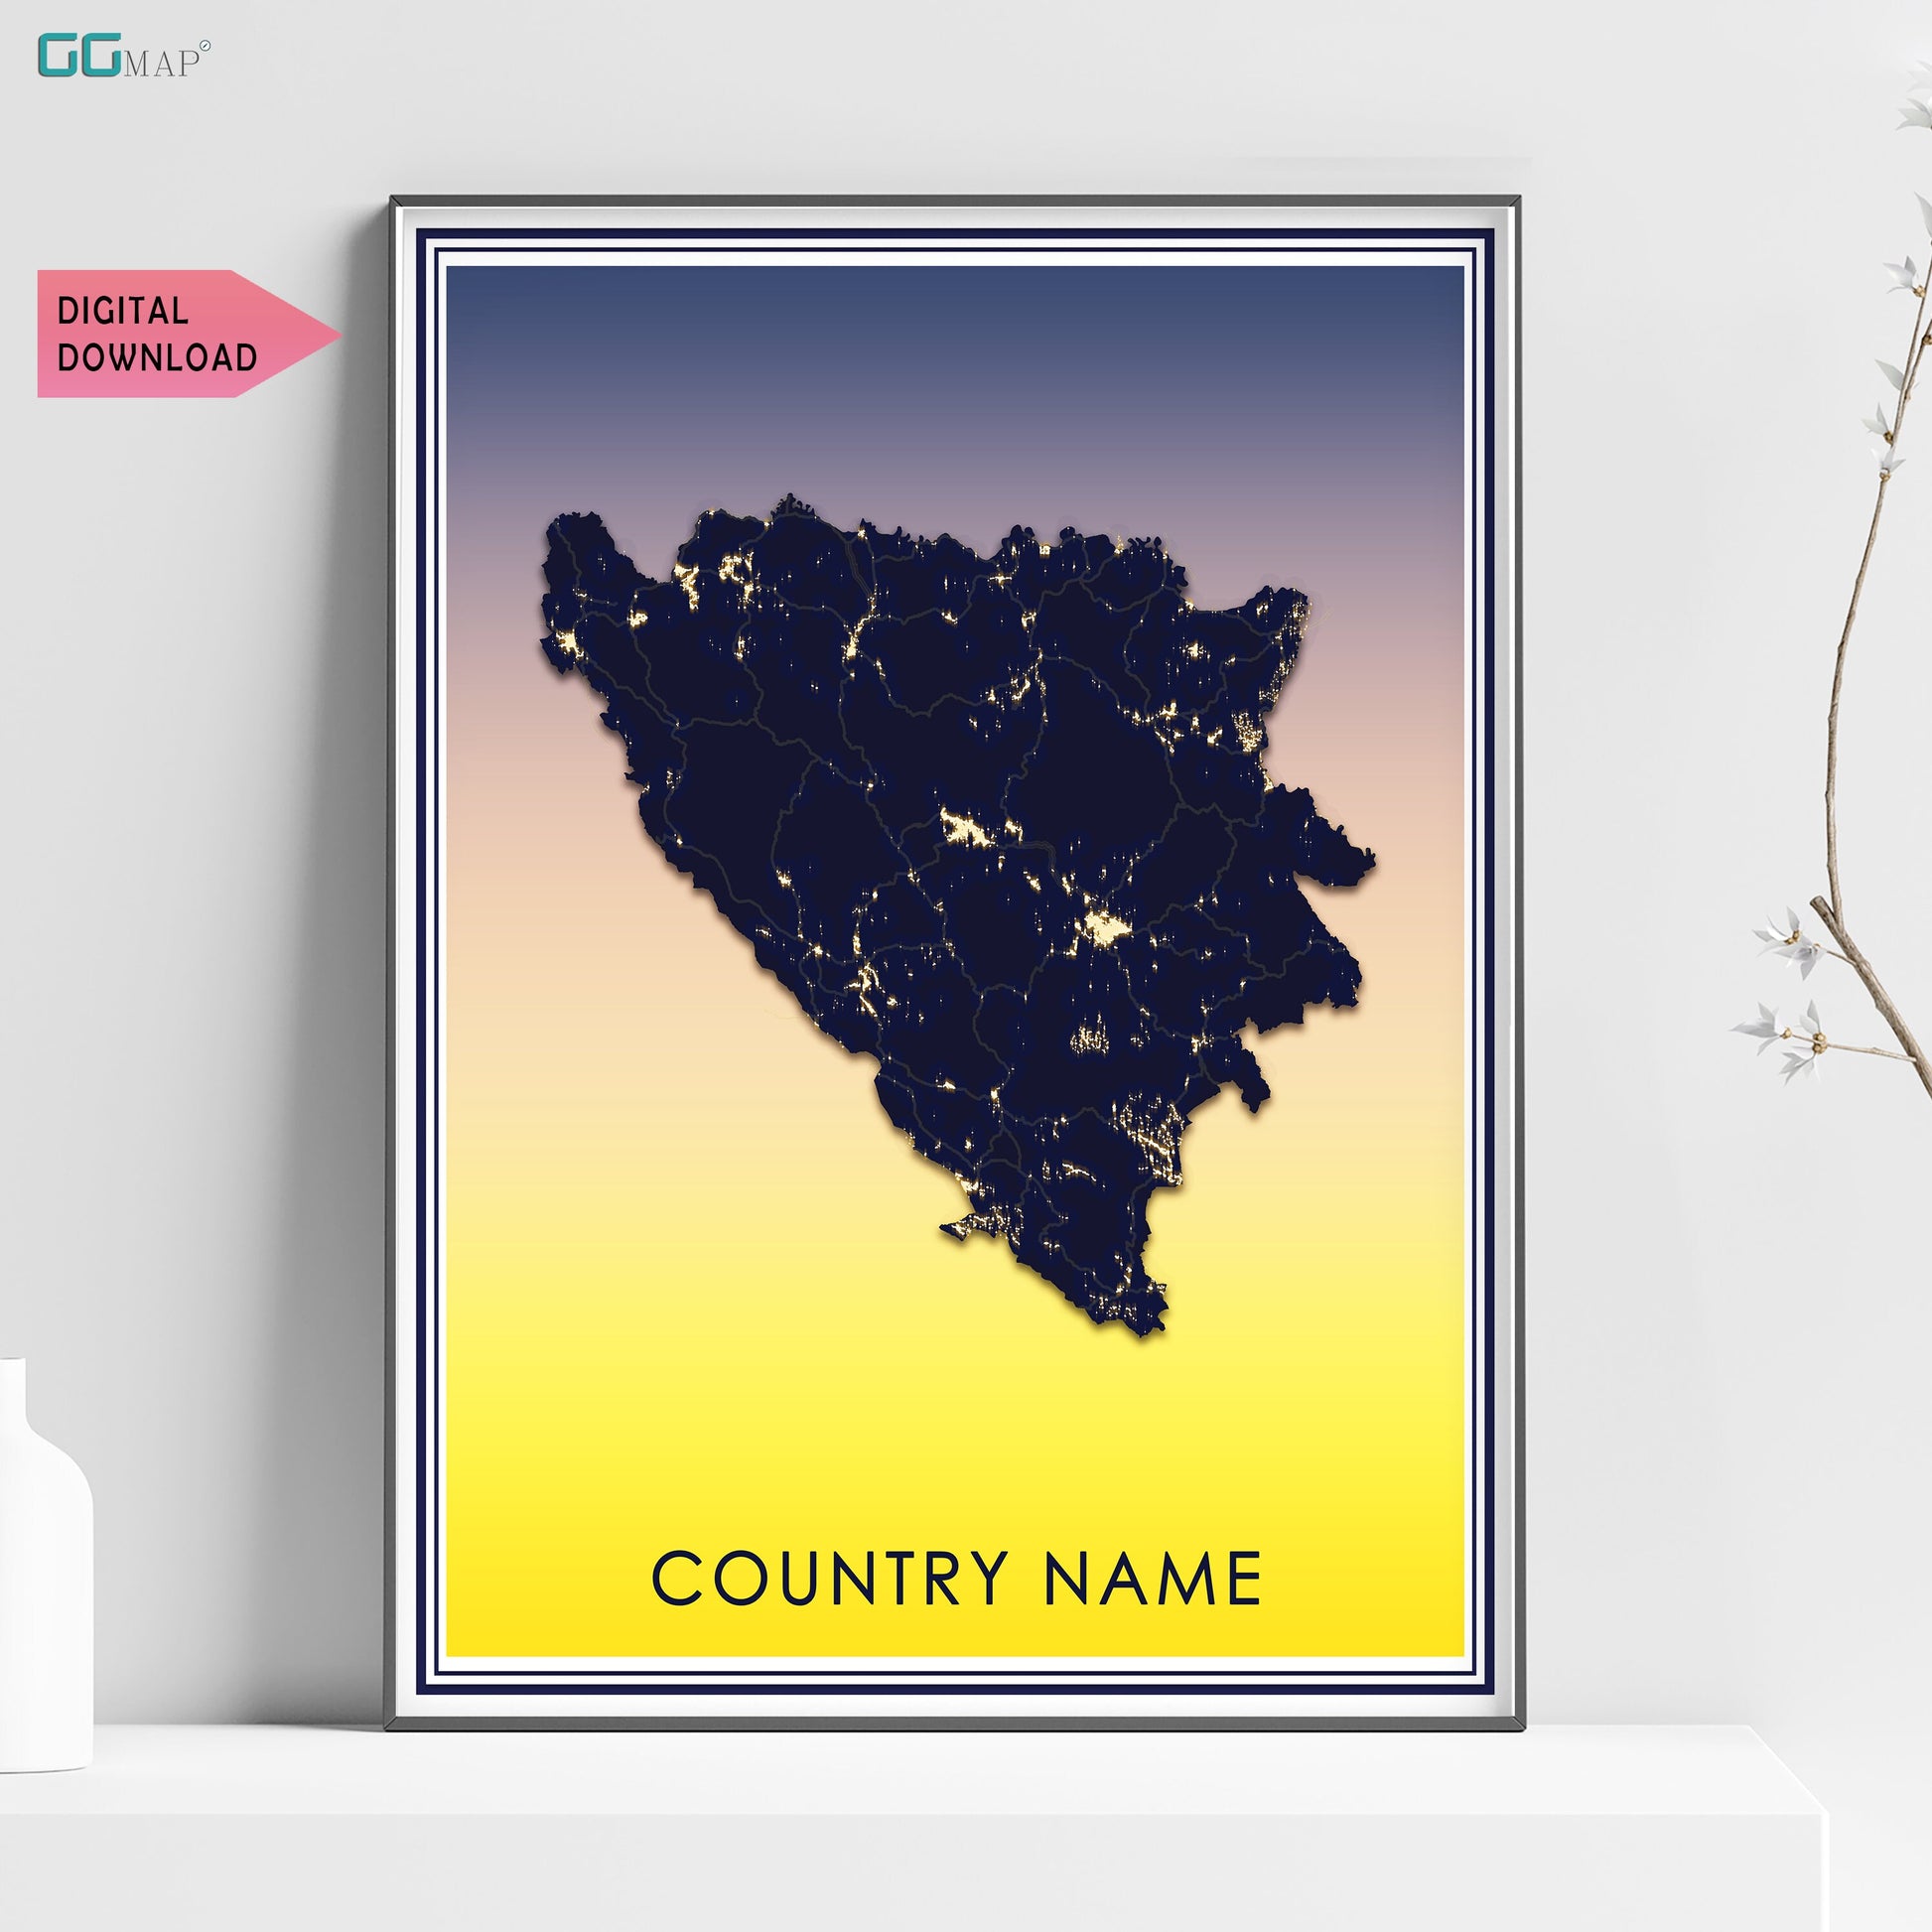 a poster of a map of the country of county name